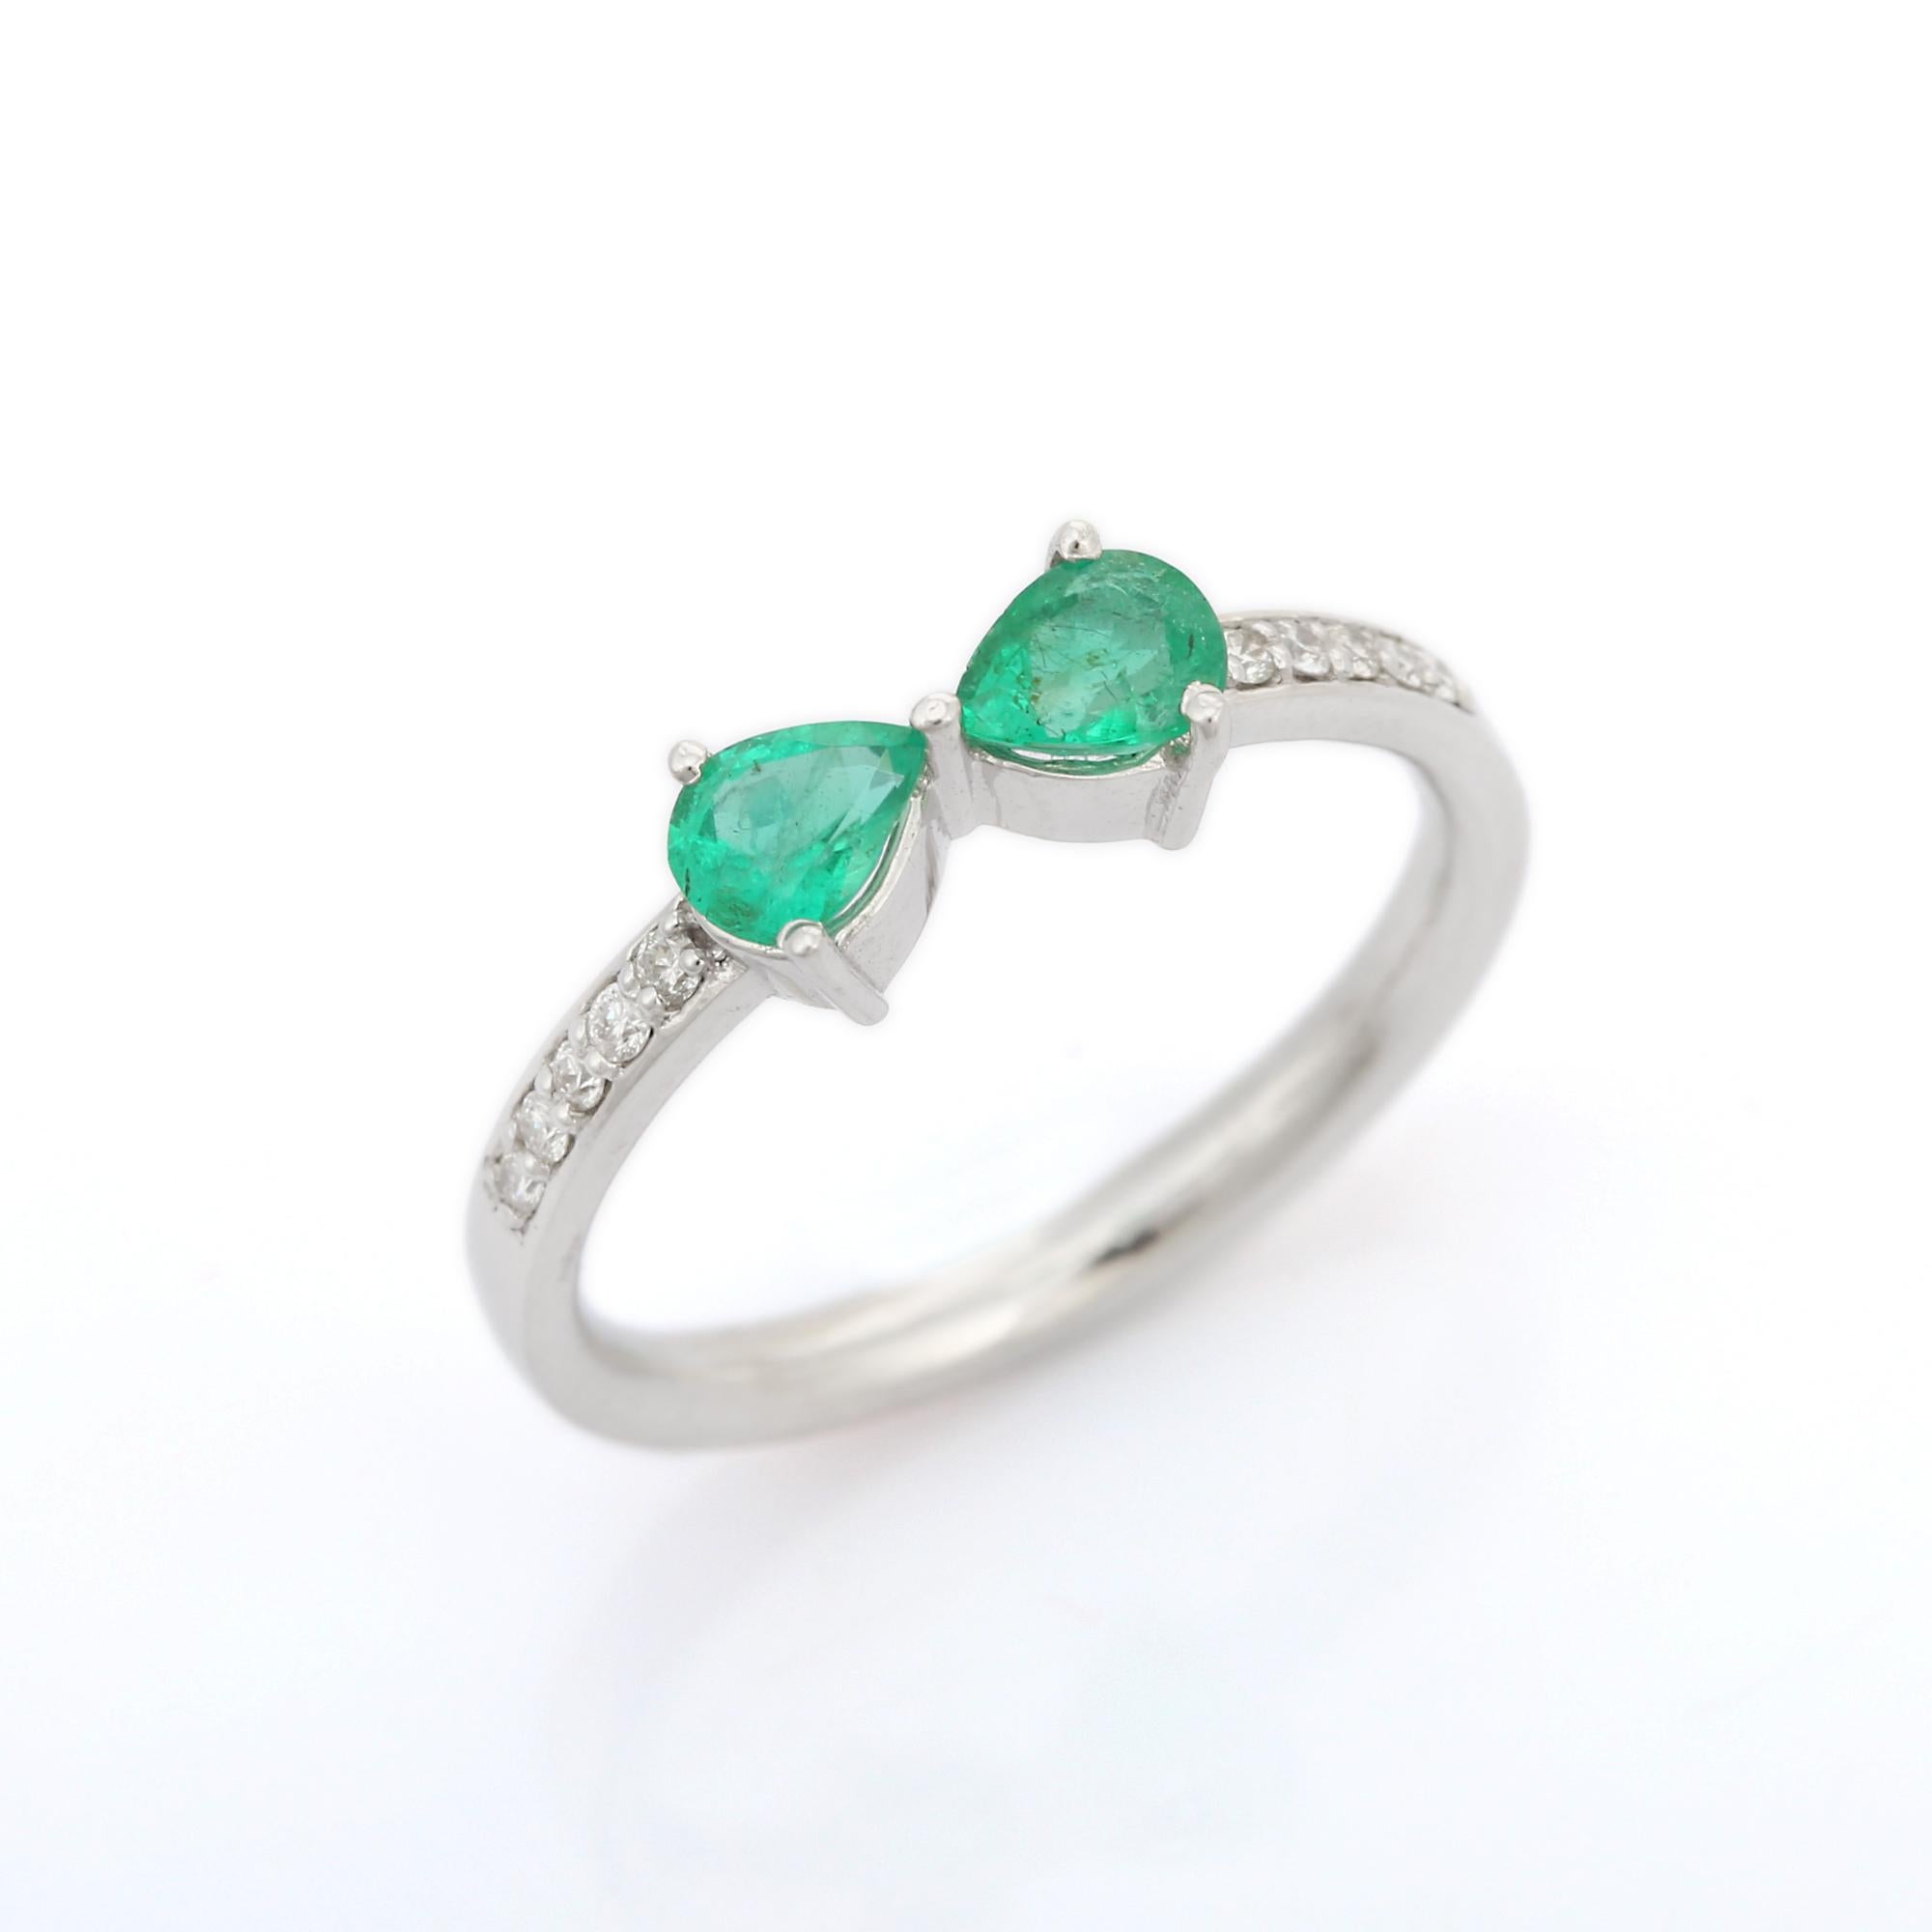 For Sale:  Natural Pear Cut Emerald Ring with Diamonds in 18K Solid White Gold 5